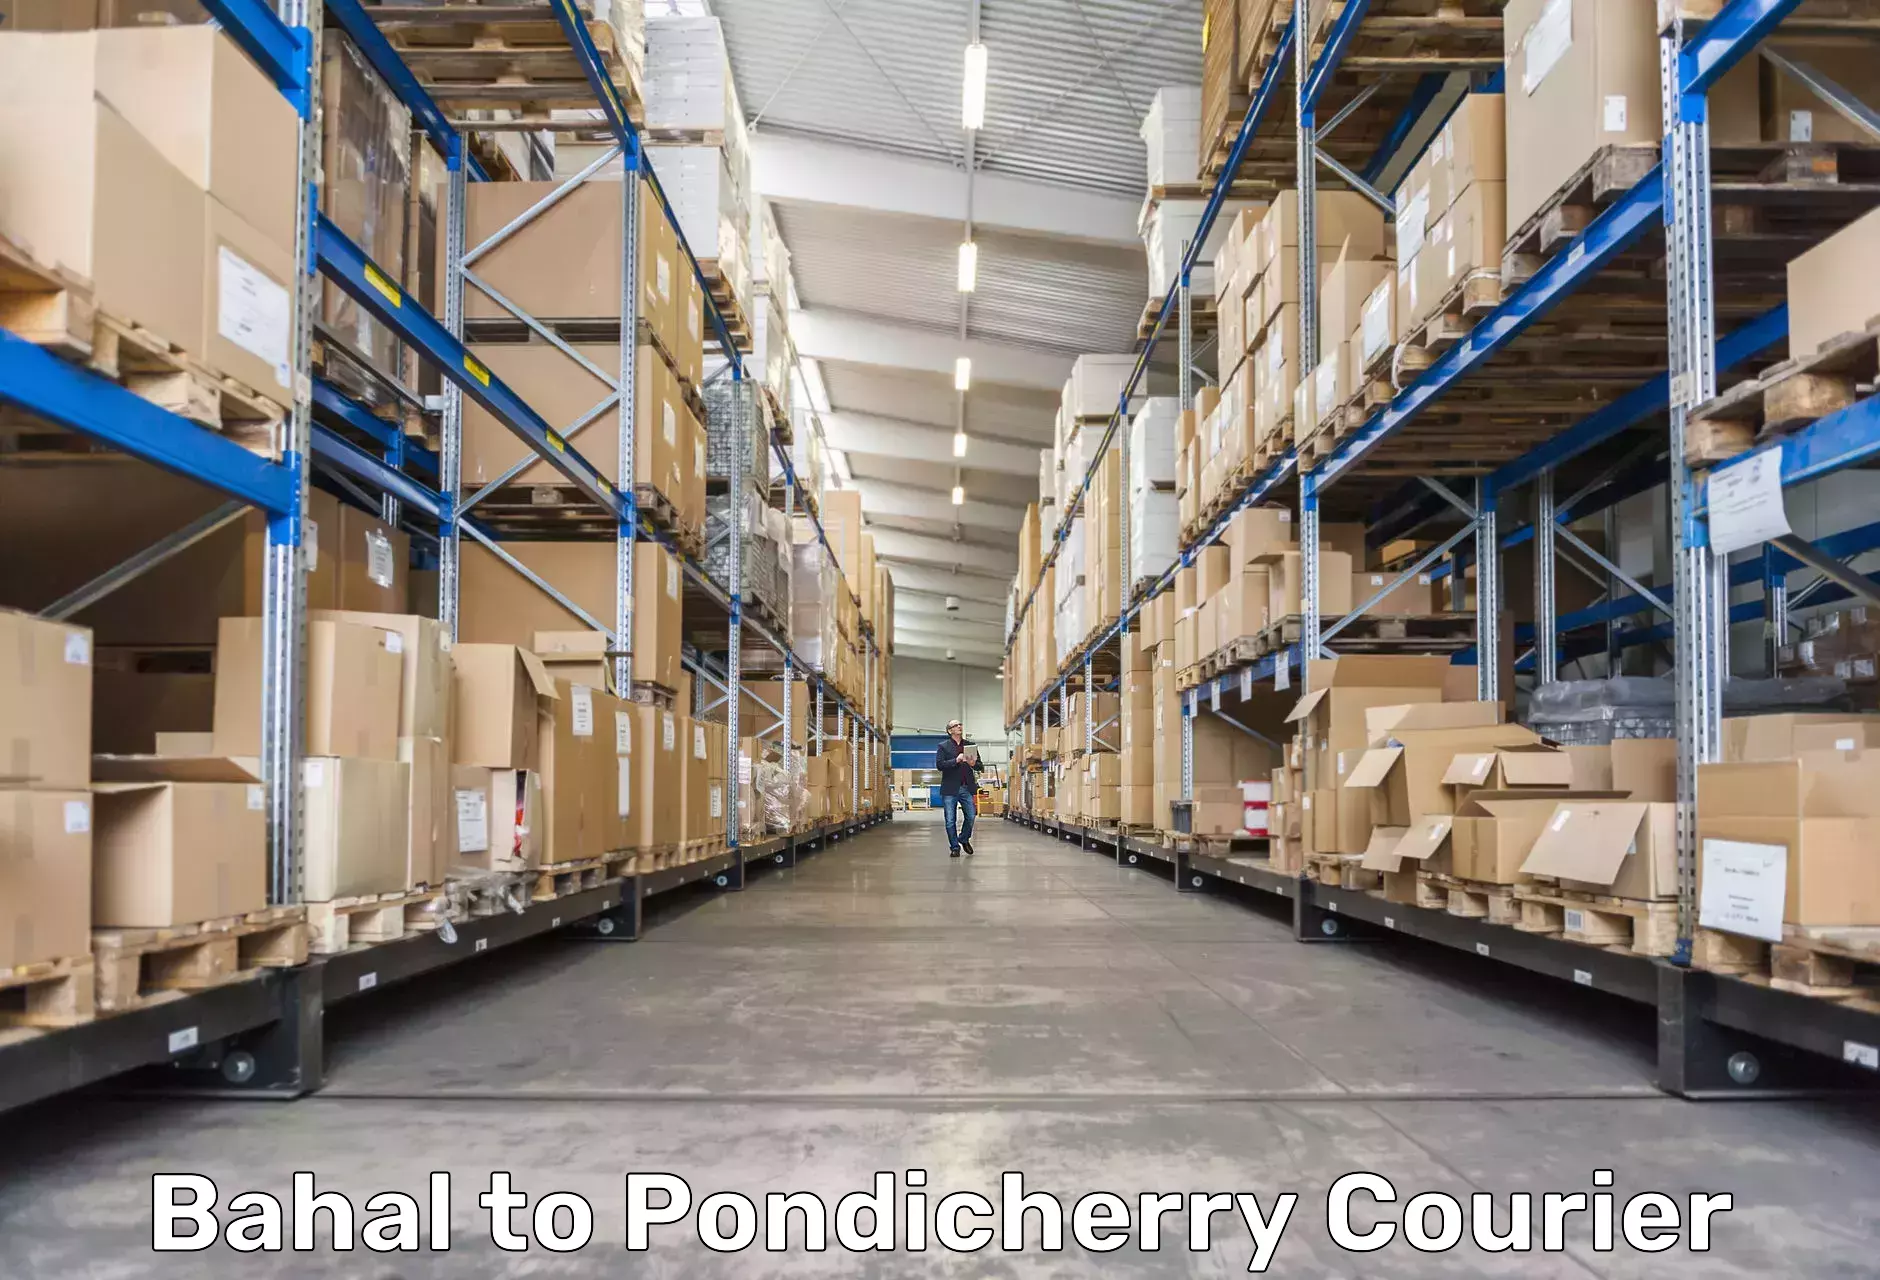 Seamless shipping experience Bahal to Pondicherry University